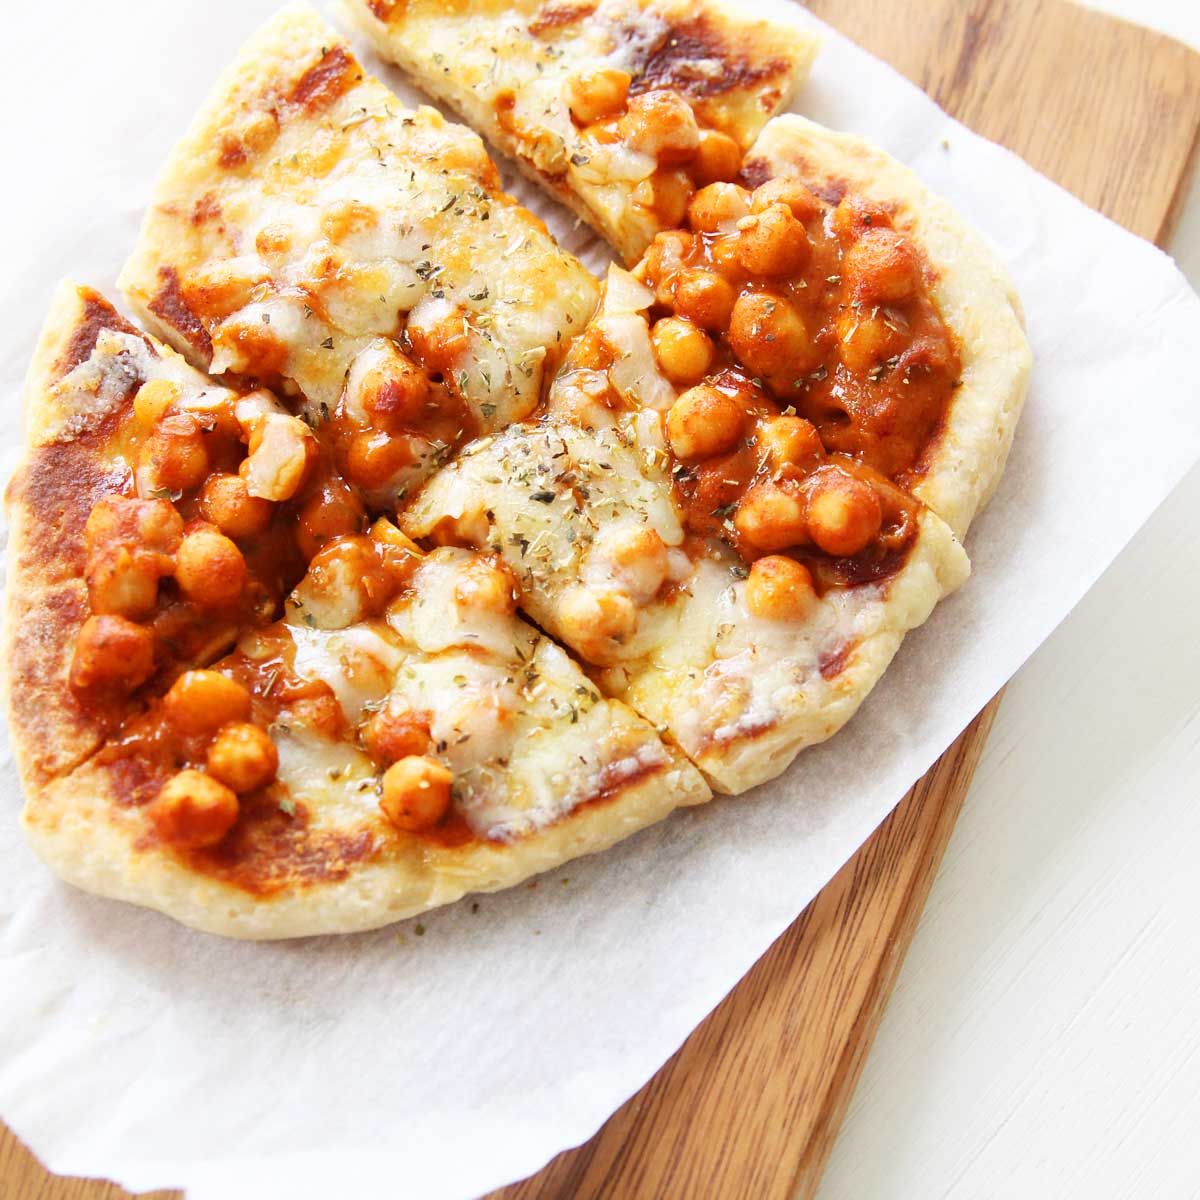 pizza naan ideas and recipes - curried chickpeas